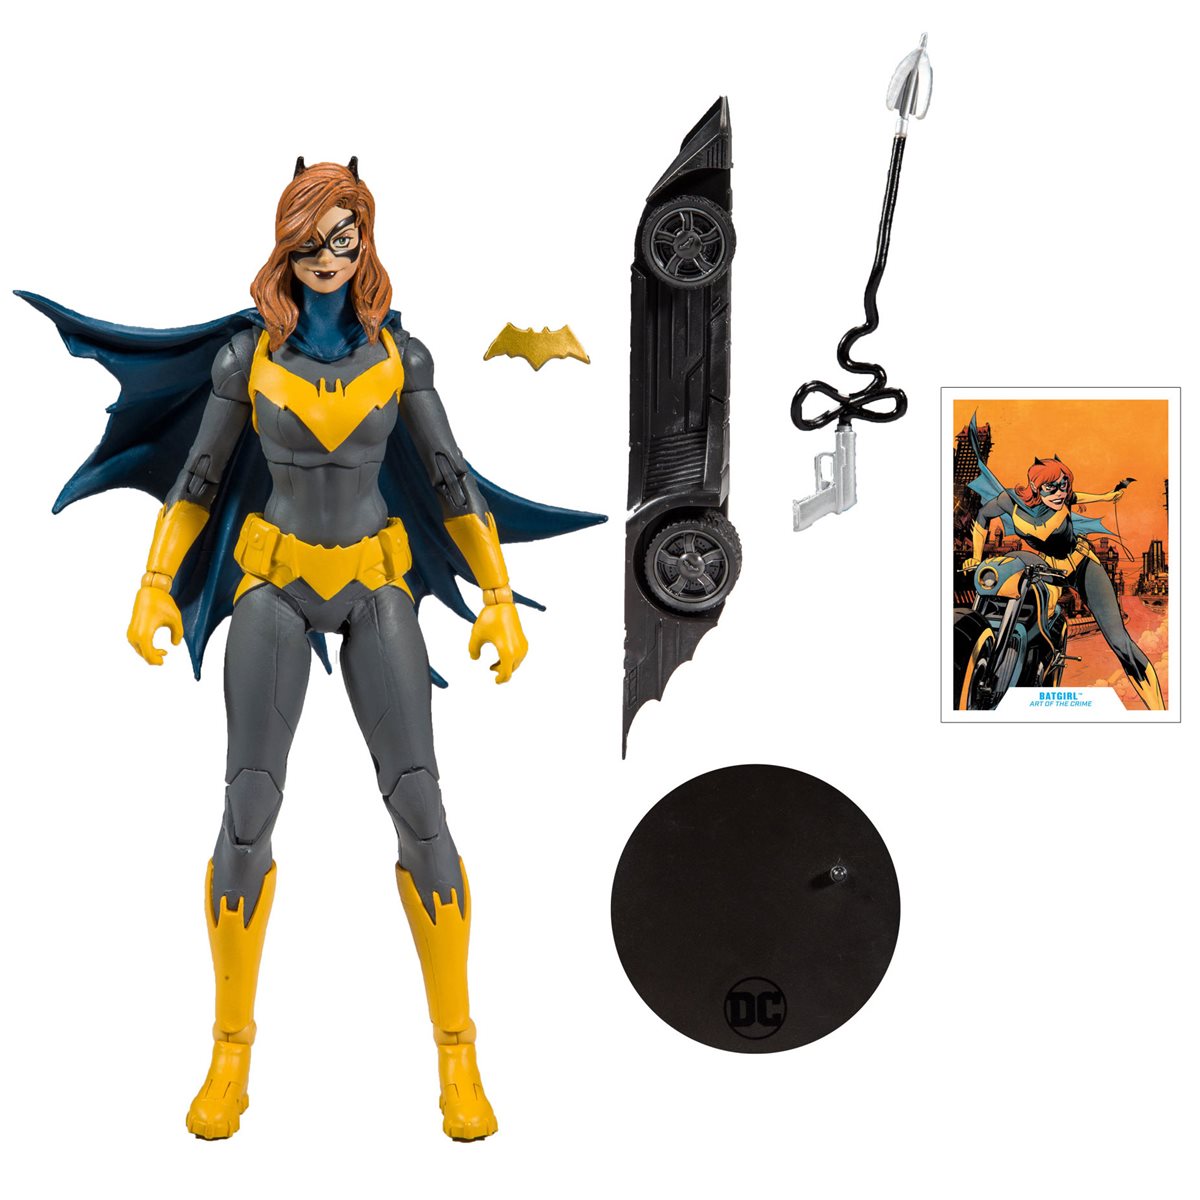 Mcfarlane Toys DC Collector Wave 1 Multiverse Batgirl 7" Action Figure w/Card 